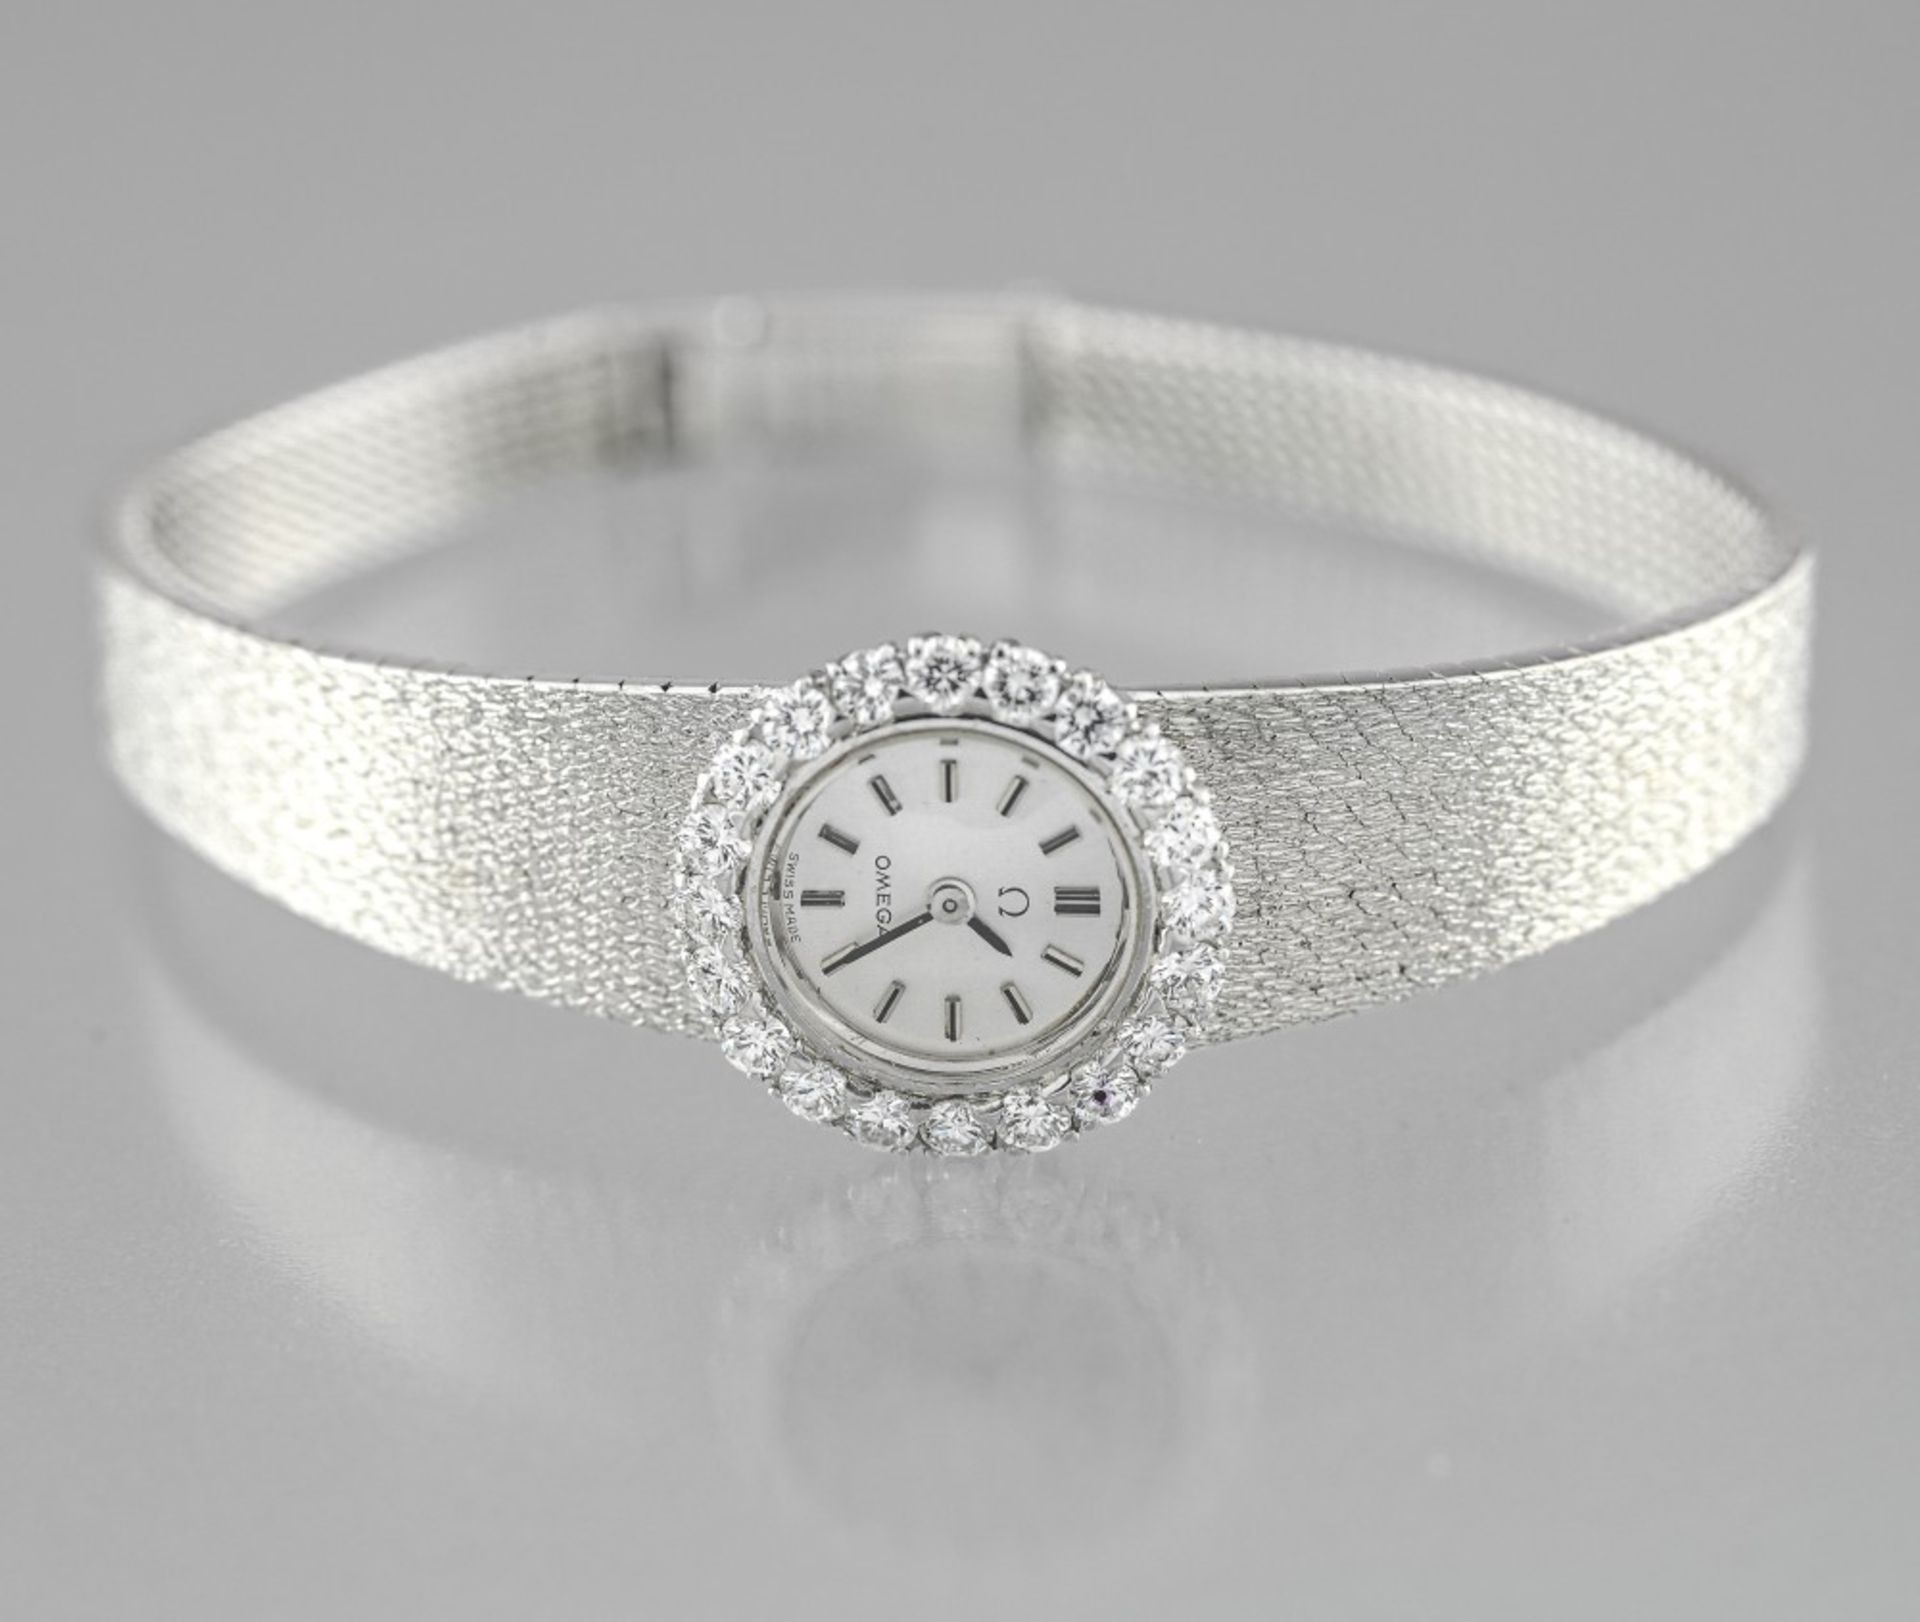 BETWEEN 1950 AND 1979 OMEGA Ladies' wristwatch in white gold Wristwatch in 18 Karat white gold.